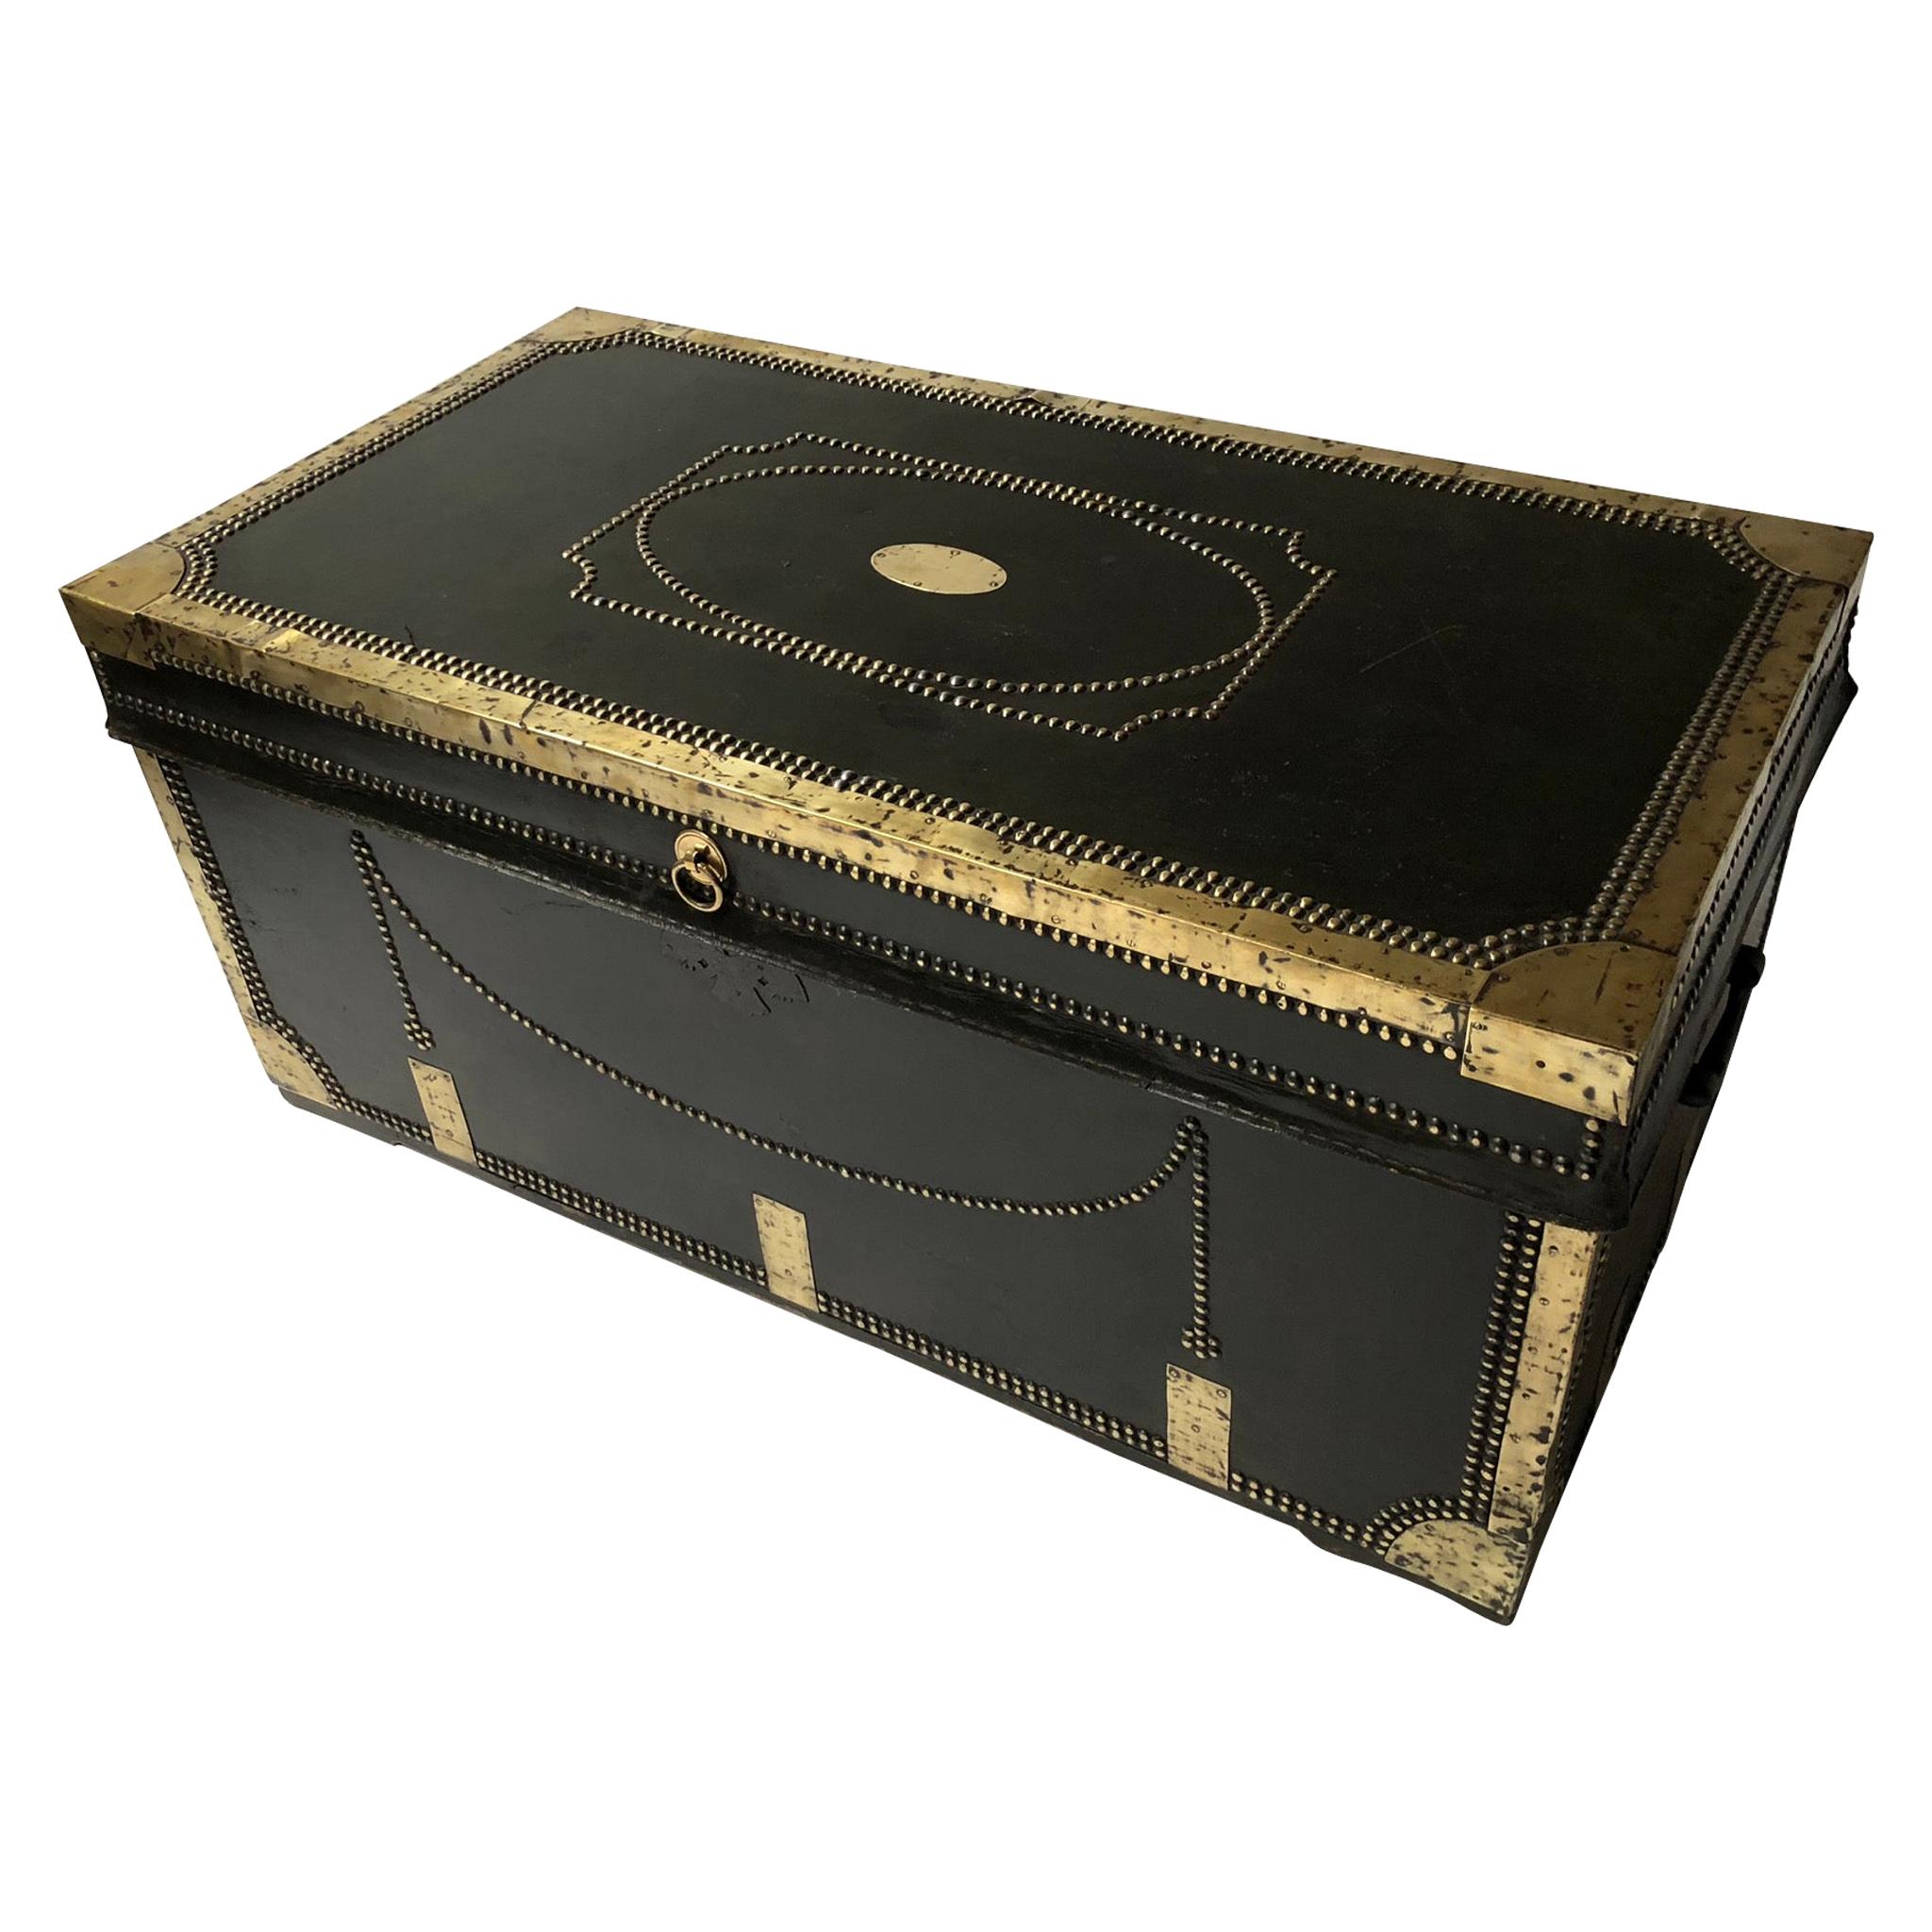 Early 19th Century Brass Bound and Studded Leather Covered Travelling Trunk